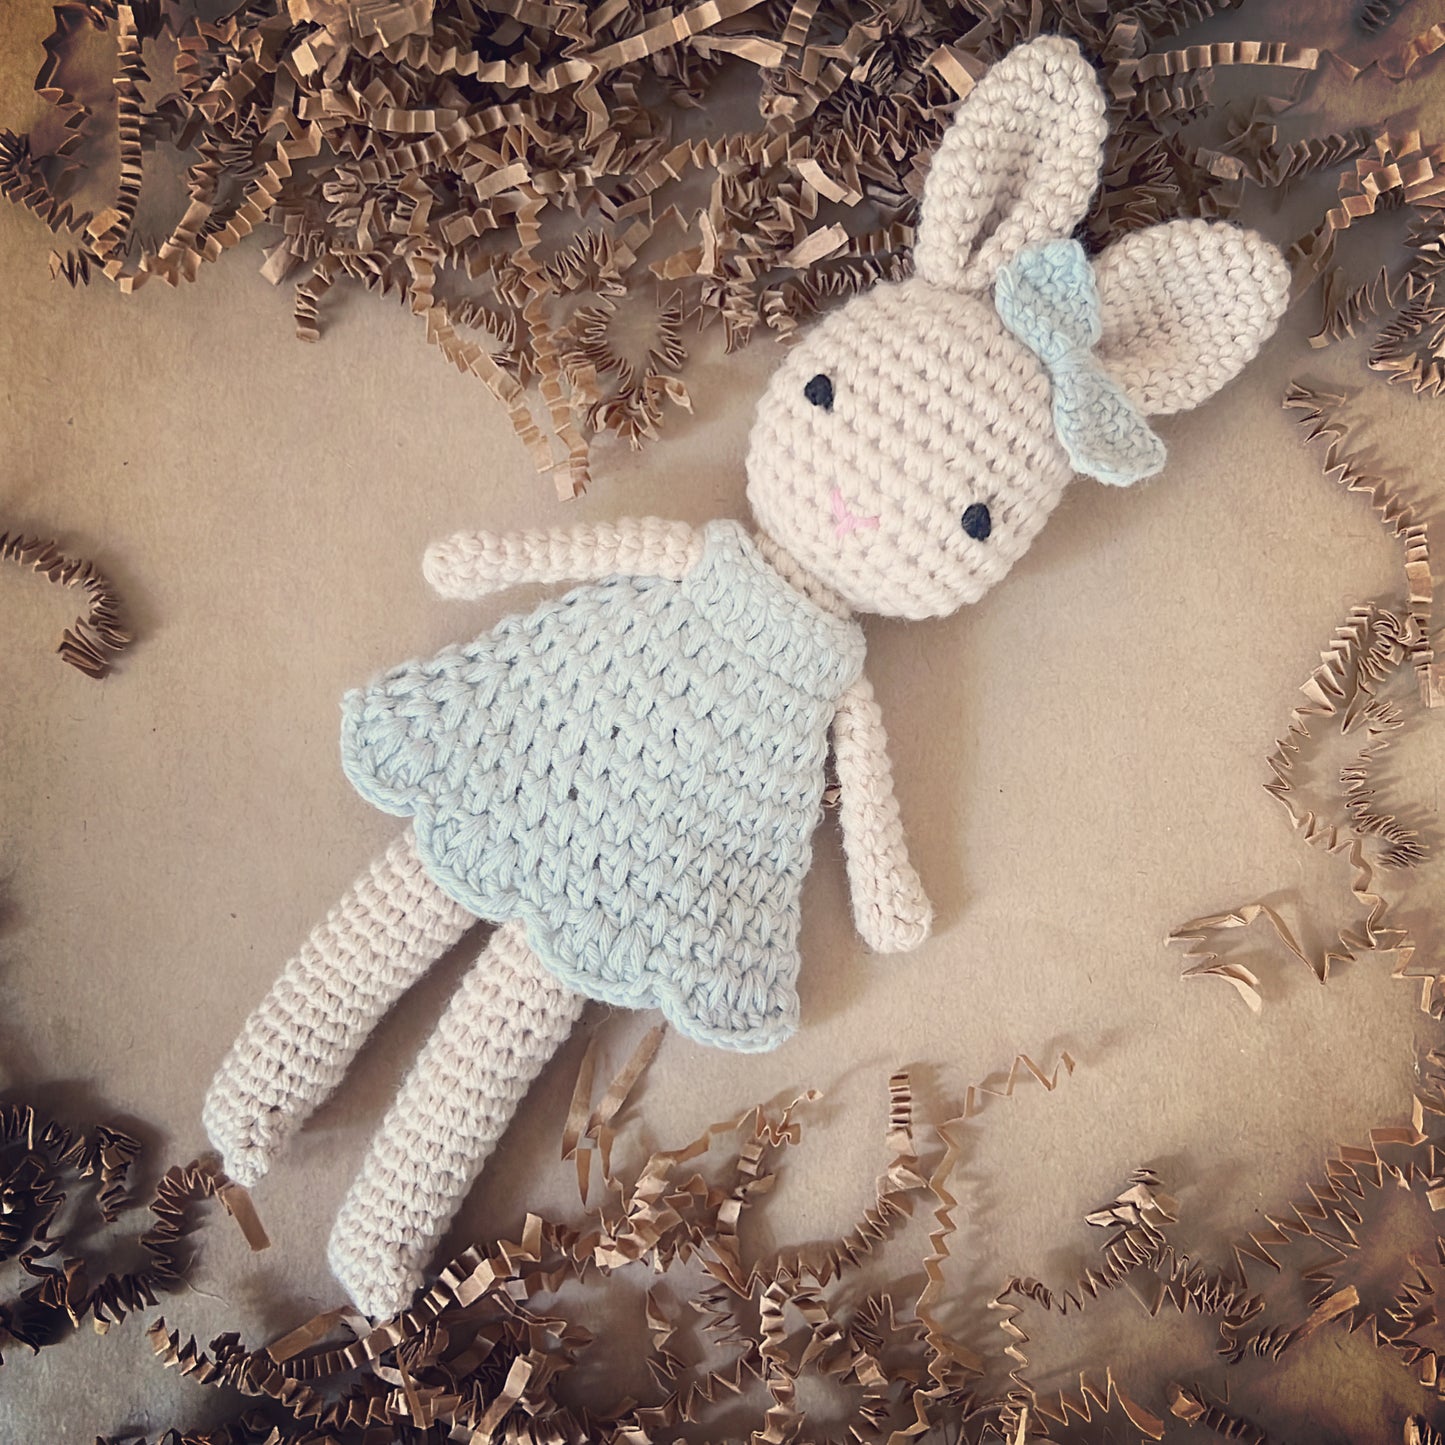 Crochet handmade bunny doll dressed in a crochet blue dress and a matching blue crochet bow, made with organic cotton yarn. This cute crochet bunny is the cutest addition to a baby shower gift, a memorable newborn gift for years to keep